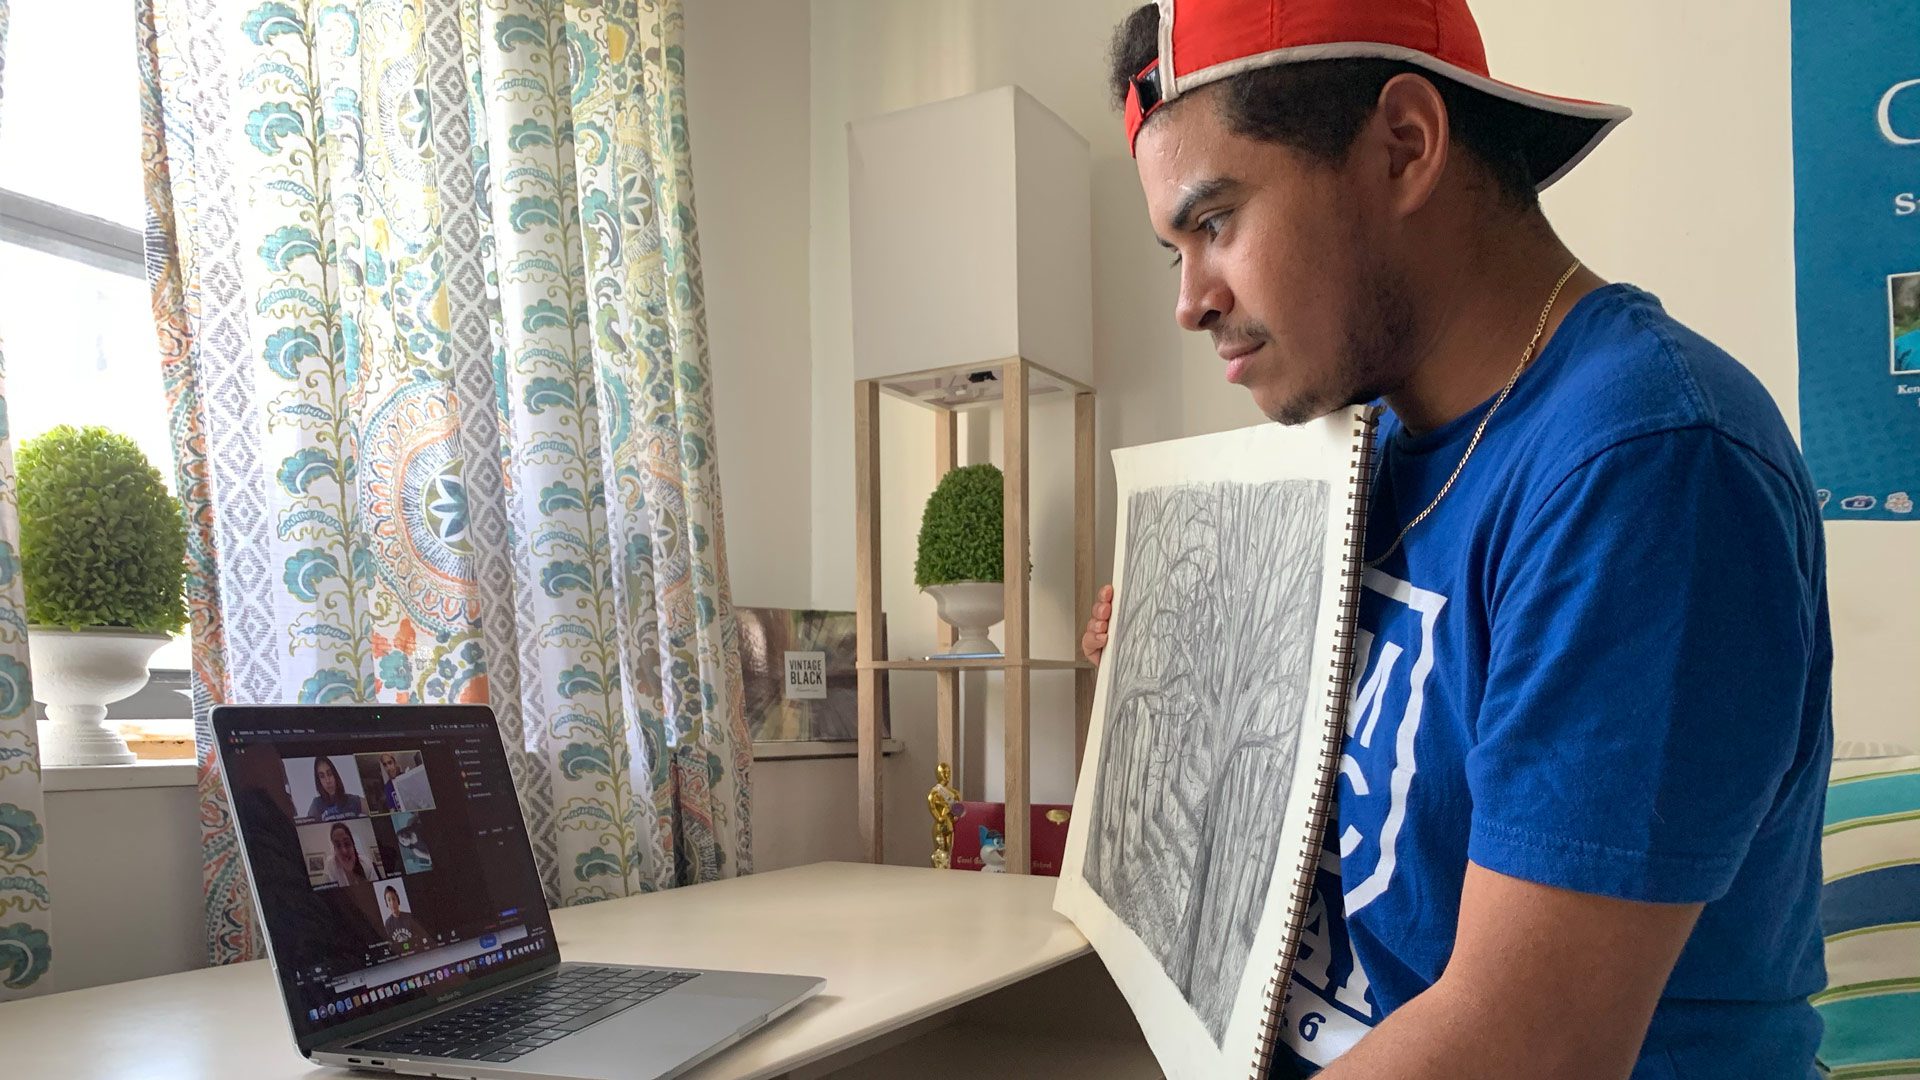 Male student showing drawing on video call